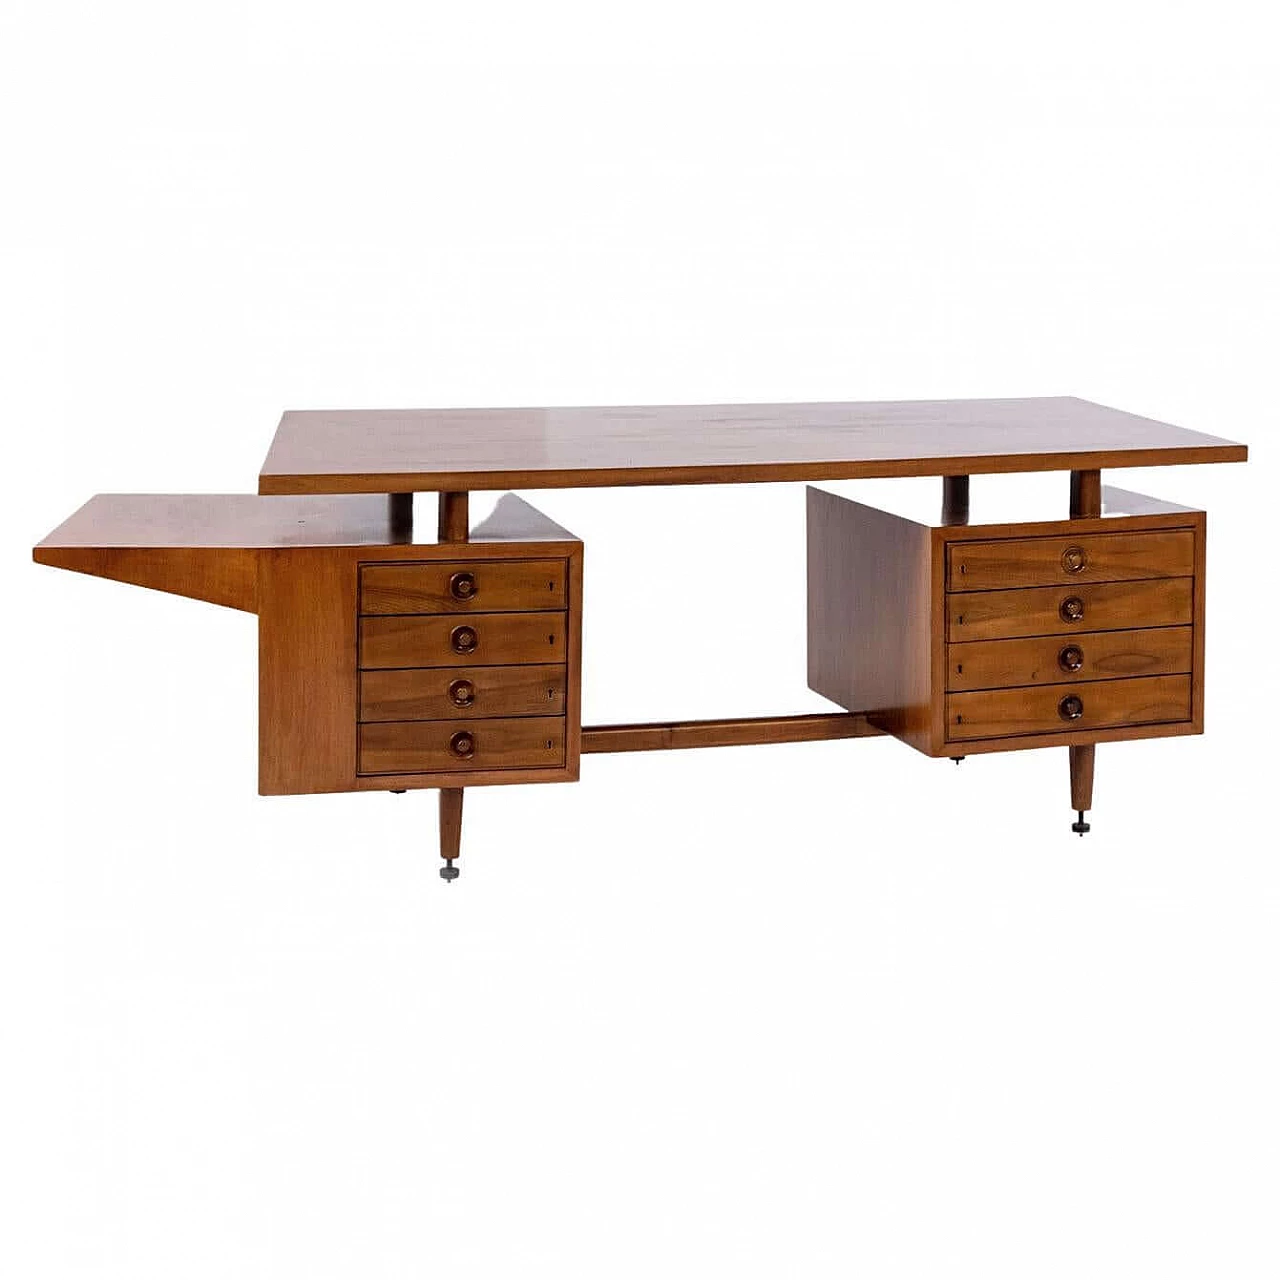 Desk attributed to Melchiorre Bega in wood and brass, 1950s 1384102